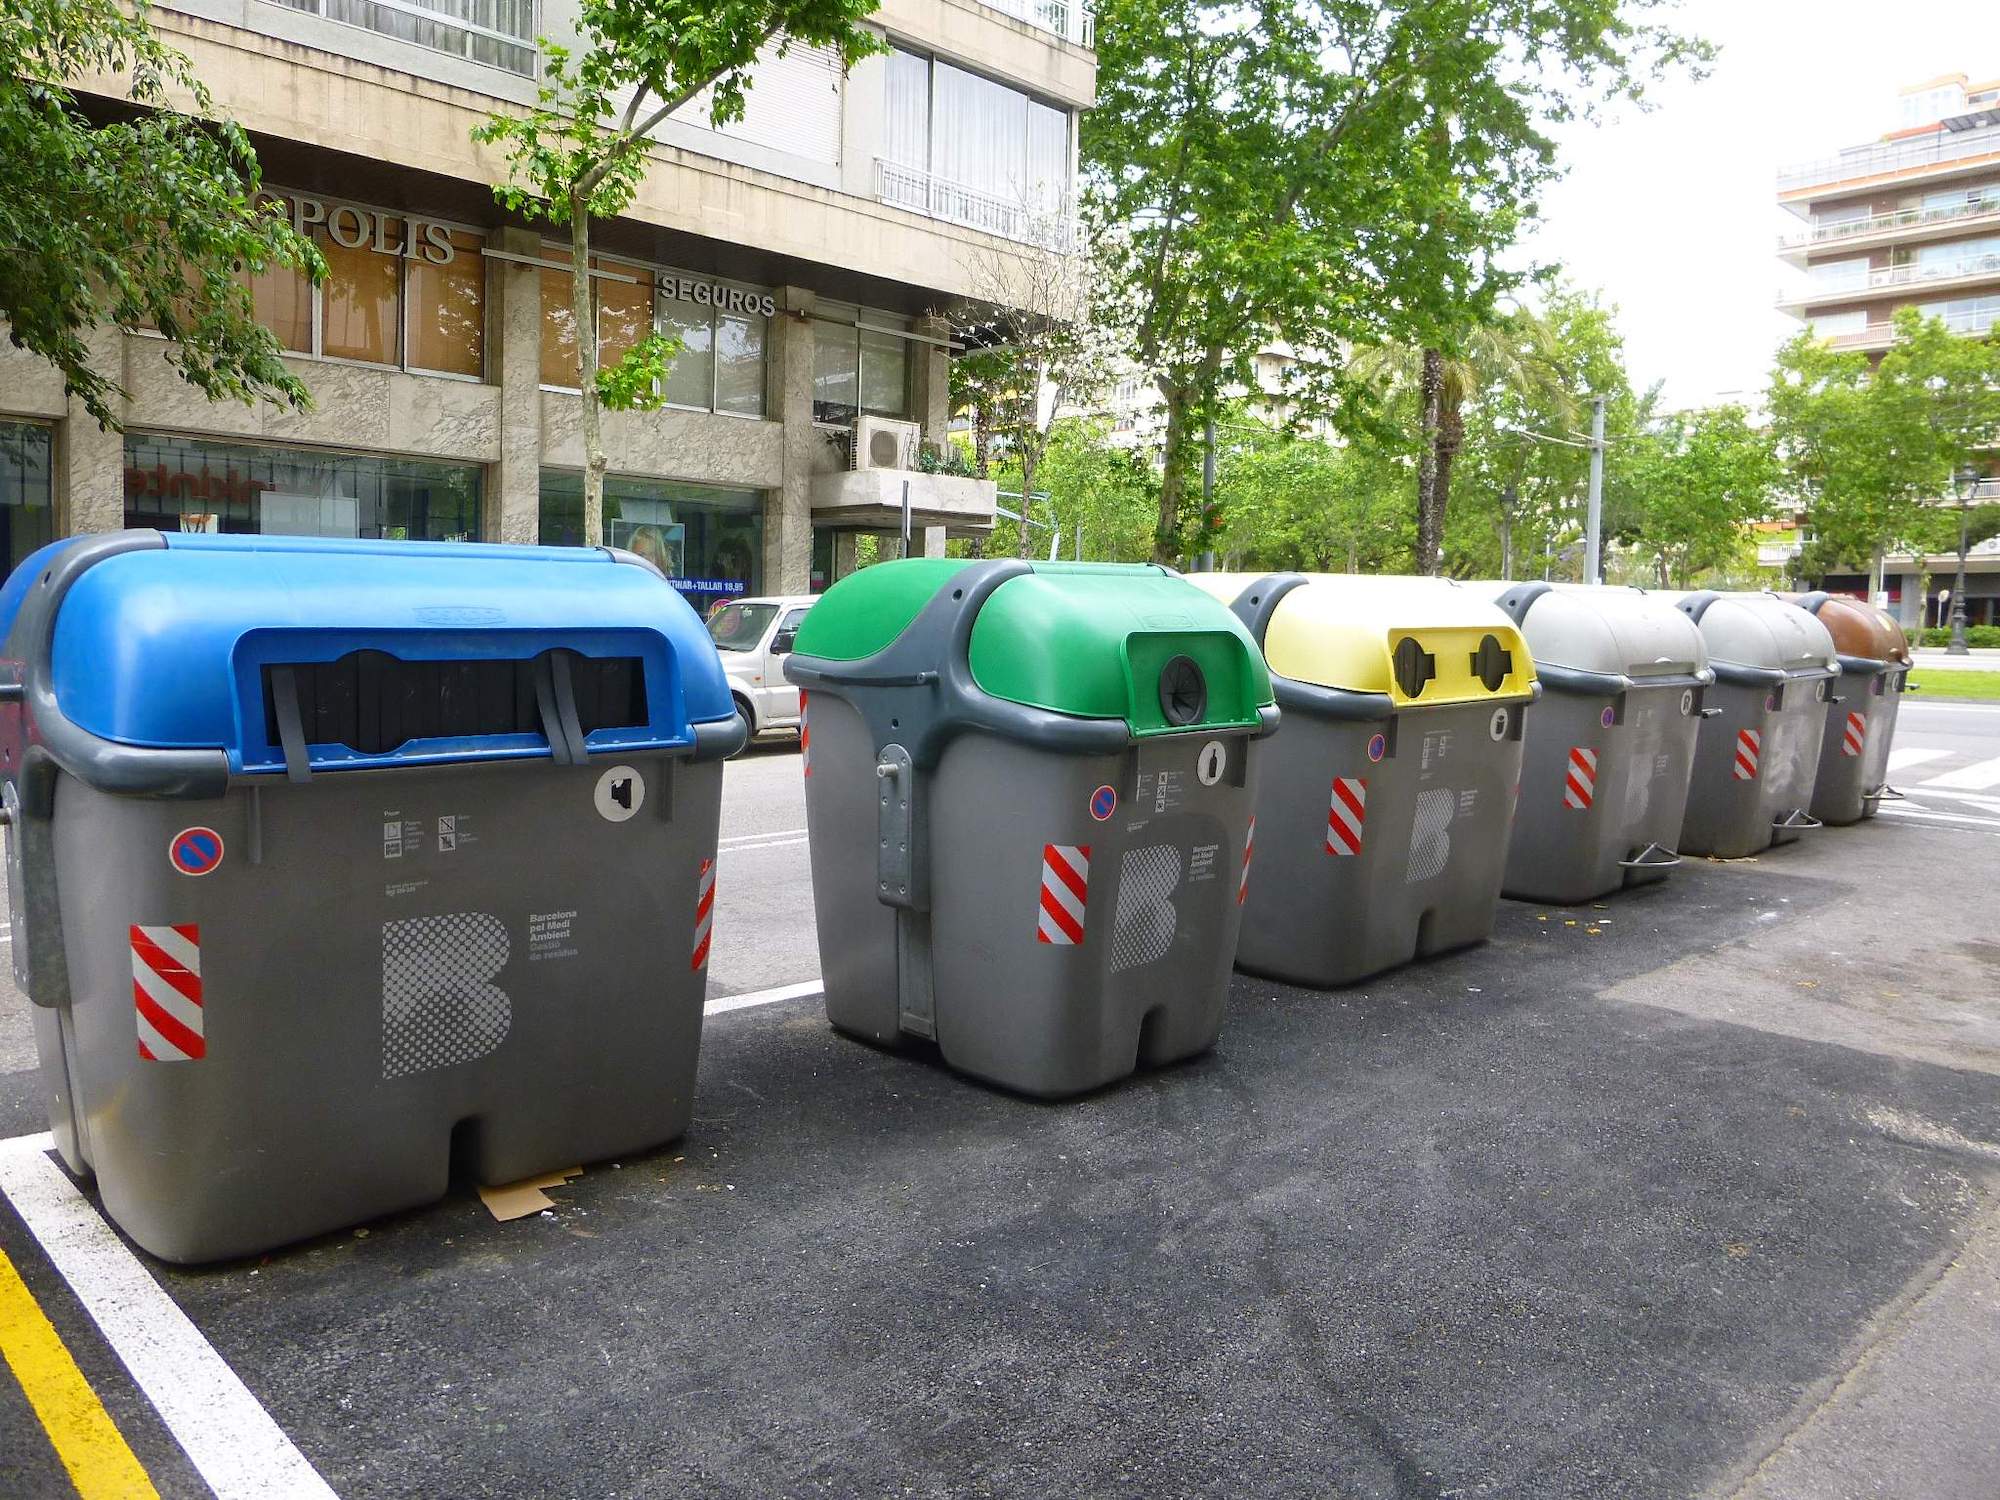 Barcelona one of the world's most sustainable cities - separate waste collection -_-_reciclaje_de_residuos_urbanos_04-min